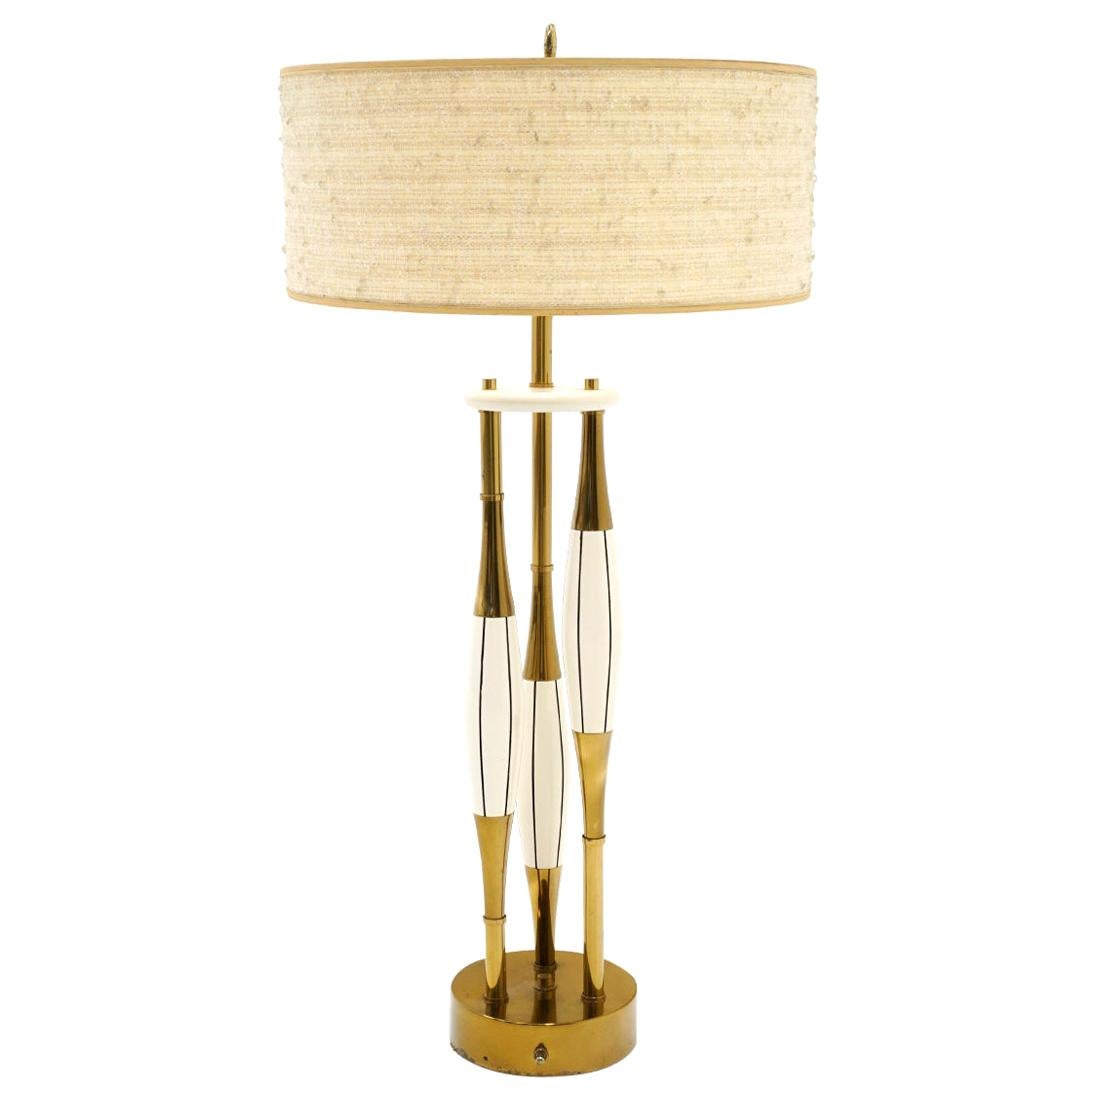 Brass & Wood Table Lamp by Stewart Ross James, White, Black Lines Original Shade For Sale